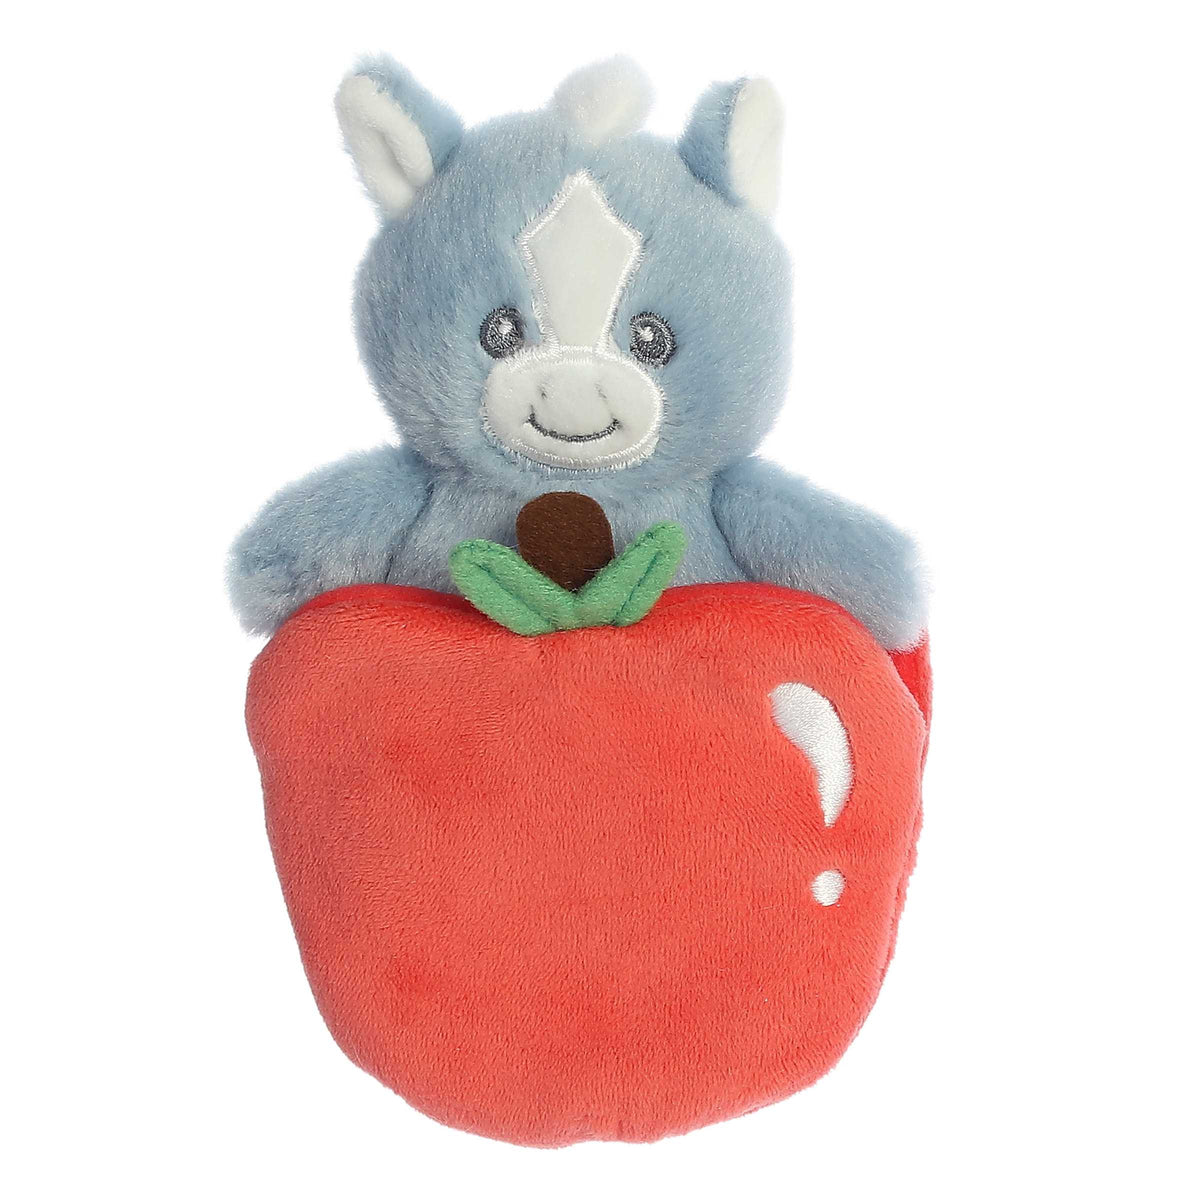 Adorable blue Pony plush rattle toy with smiling face and white accent on ears sitting inside a crinkly red apple pocket